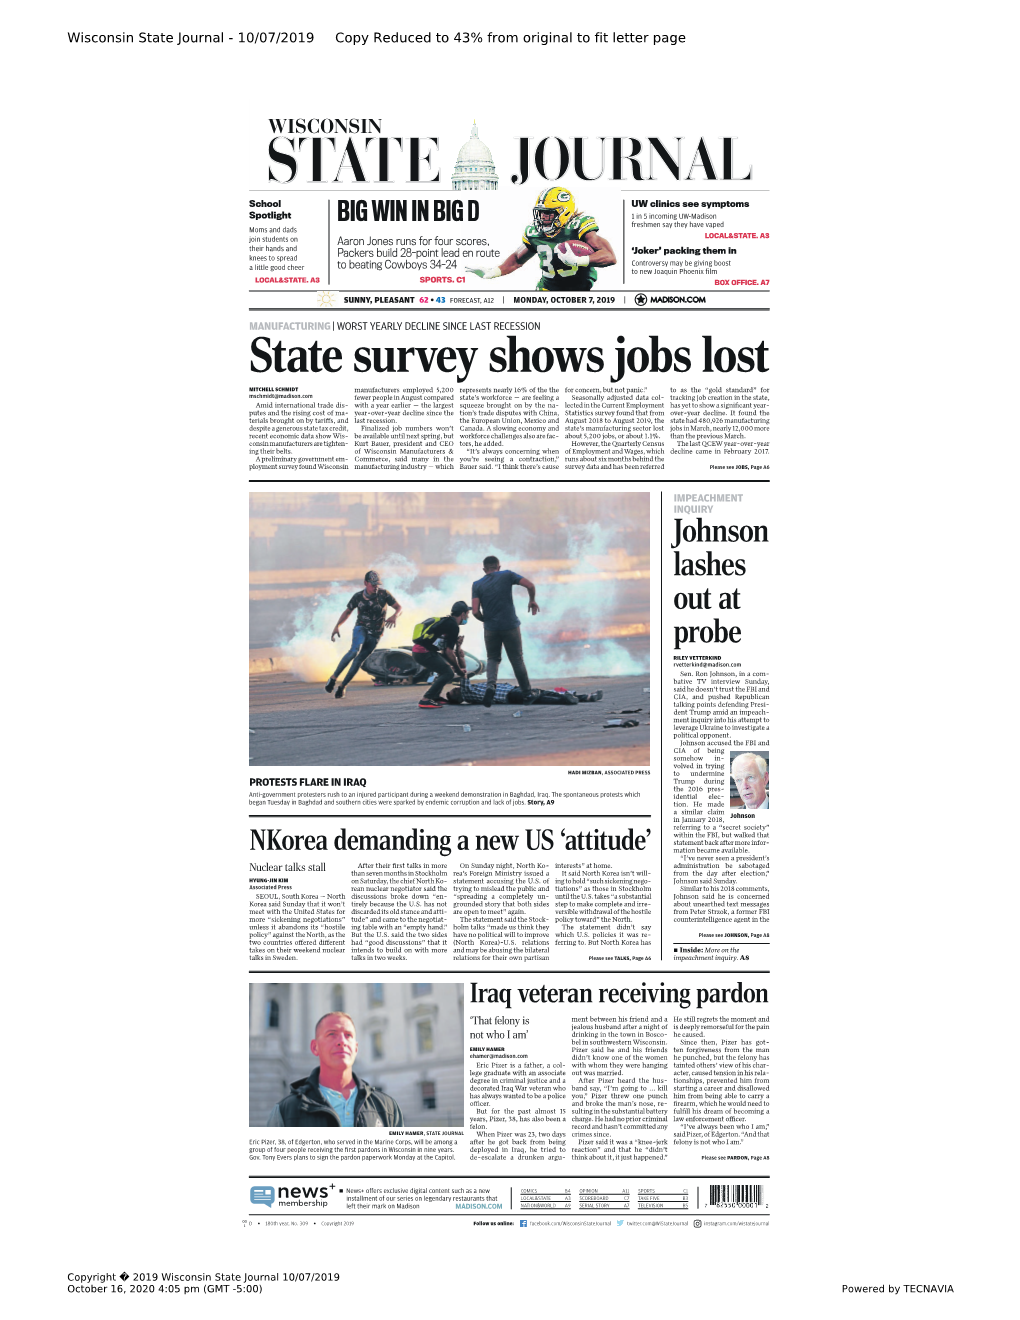 State Survey Shows Jobs Lost